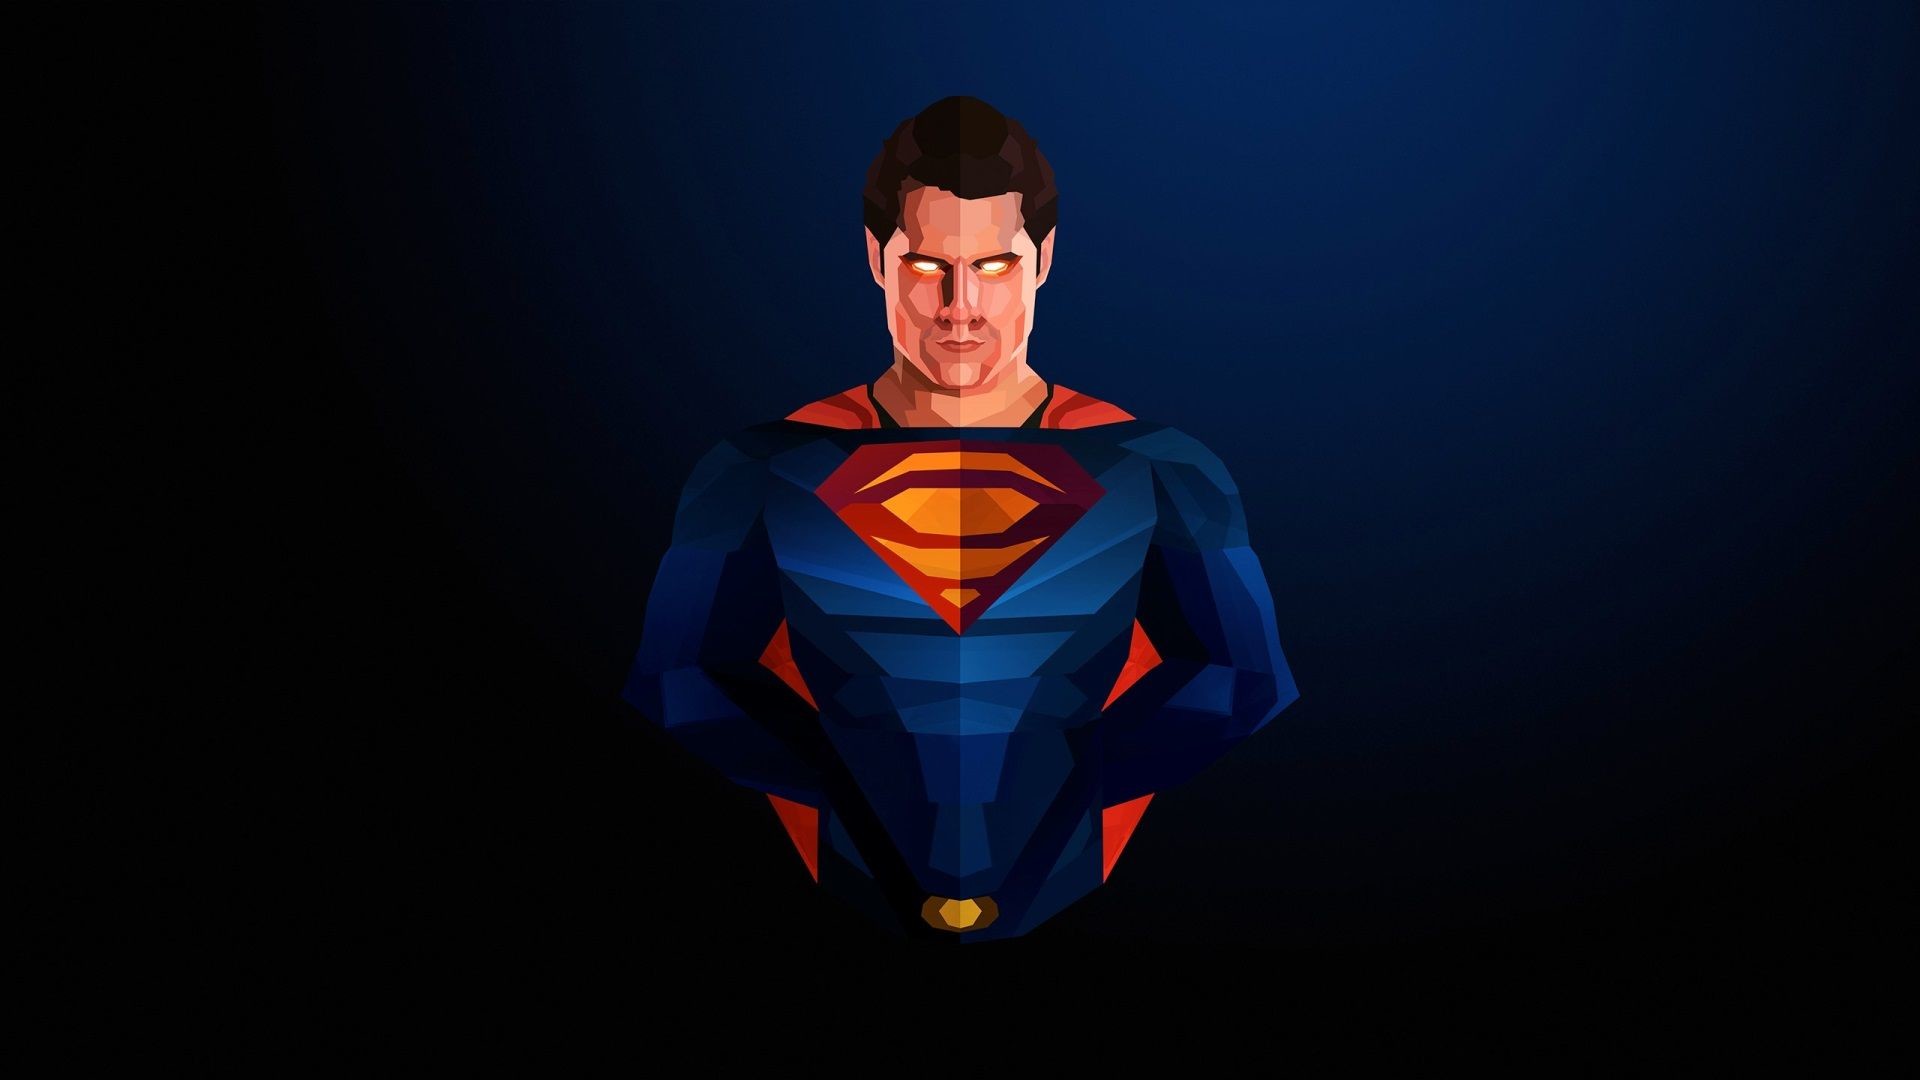 Superman Wallpapers 1080p High Quality 
 Data-src - Justin Maller Wallpaper Superman - HD Wallpaper 